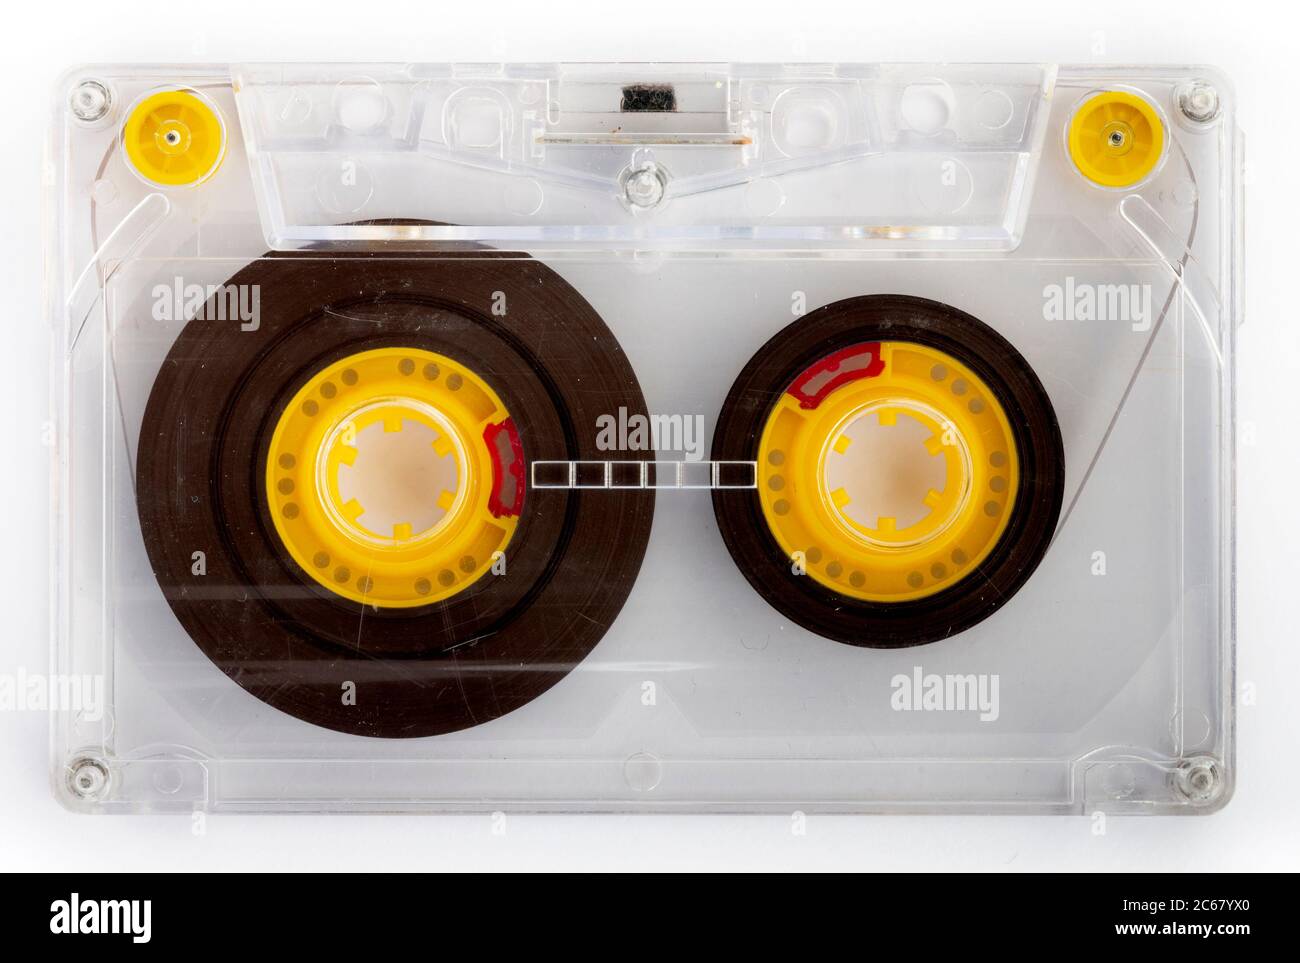 https://c8.alamy.com/comp/2C67YX0/transparent-audio-cassette-tape-with-yellow-tape-reels-and-tape-guides-on-white-background-as-music-concept-2C67YX0.jpg